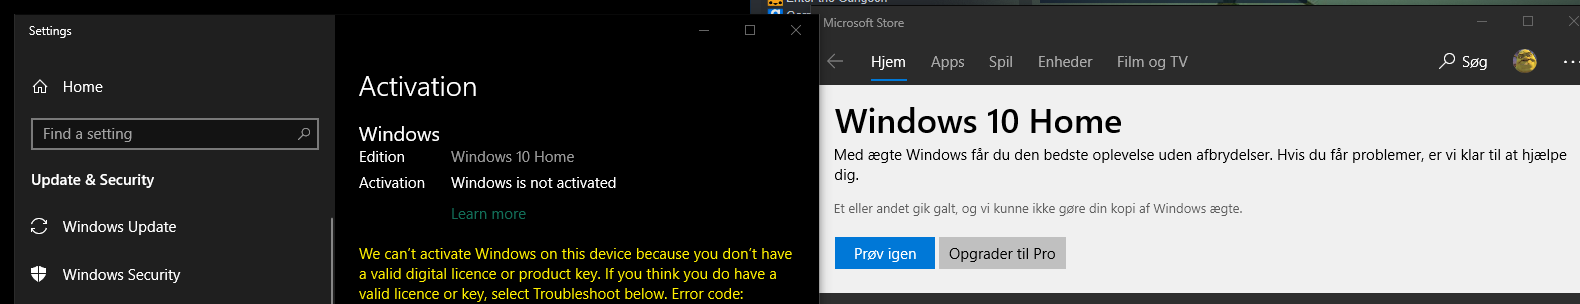 I bought Windows 10 Home from the store to activate windows but it won't work 50cf0a49-edf1-44ae-8043-14c95c0ca921?upload=true.png